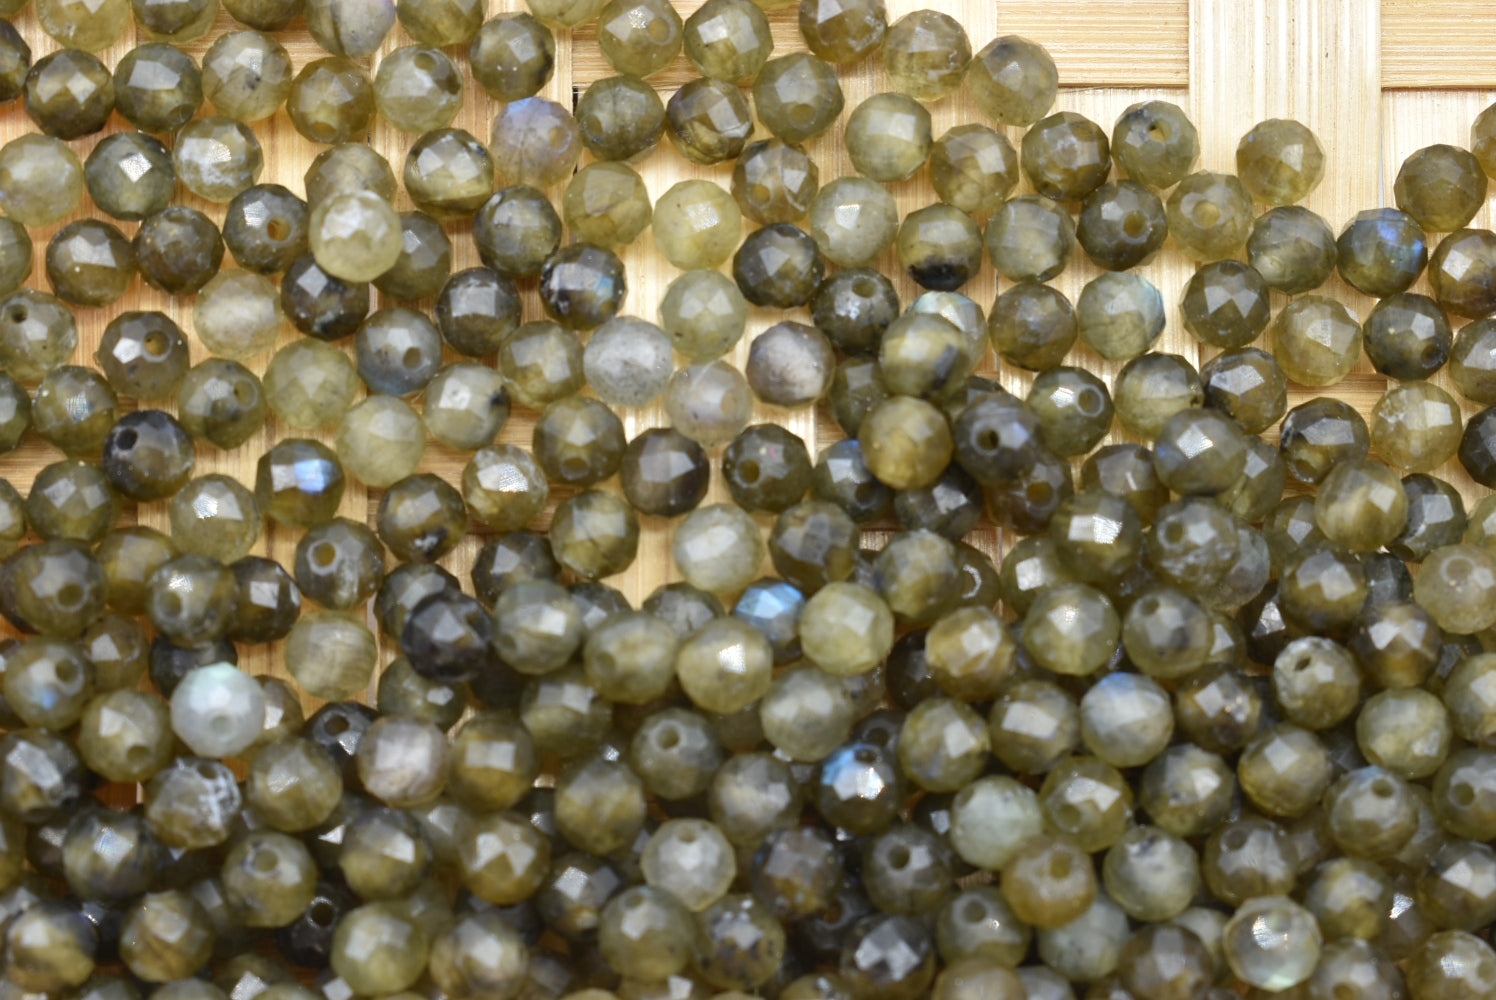 5 mm Frosted Labradorite Beads Perforated - 5 Beads